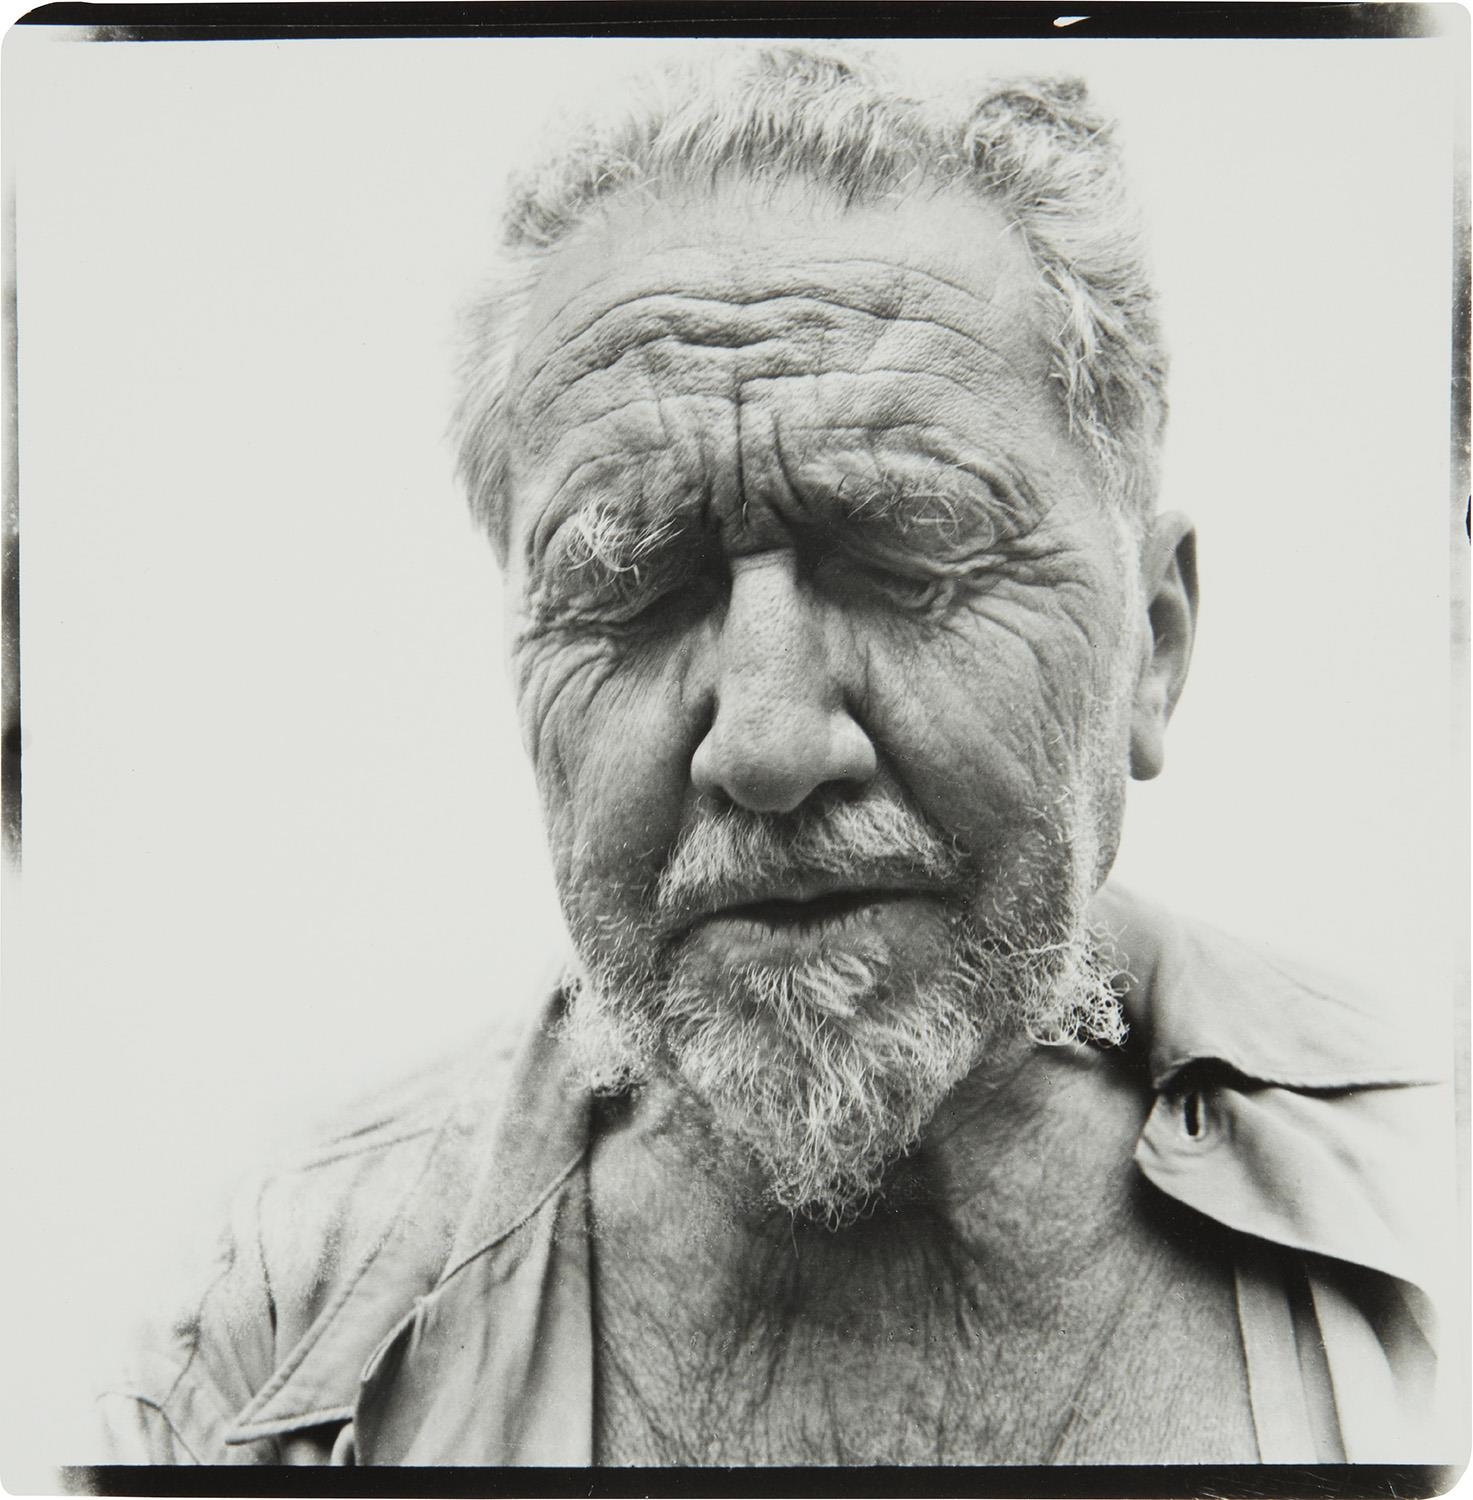 Ezra Pound, poet, Rutherford, New Jersey, June 30